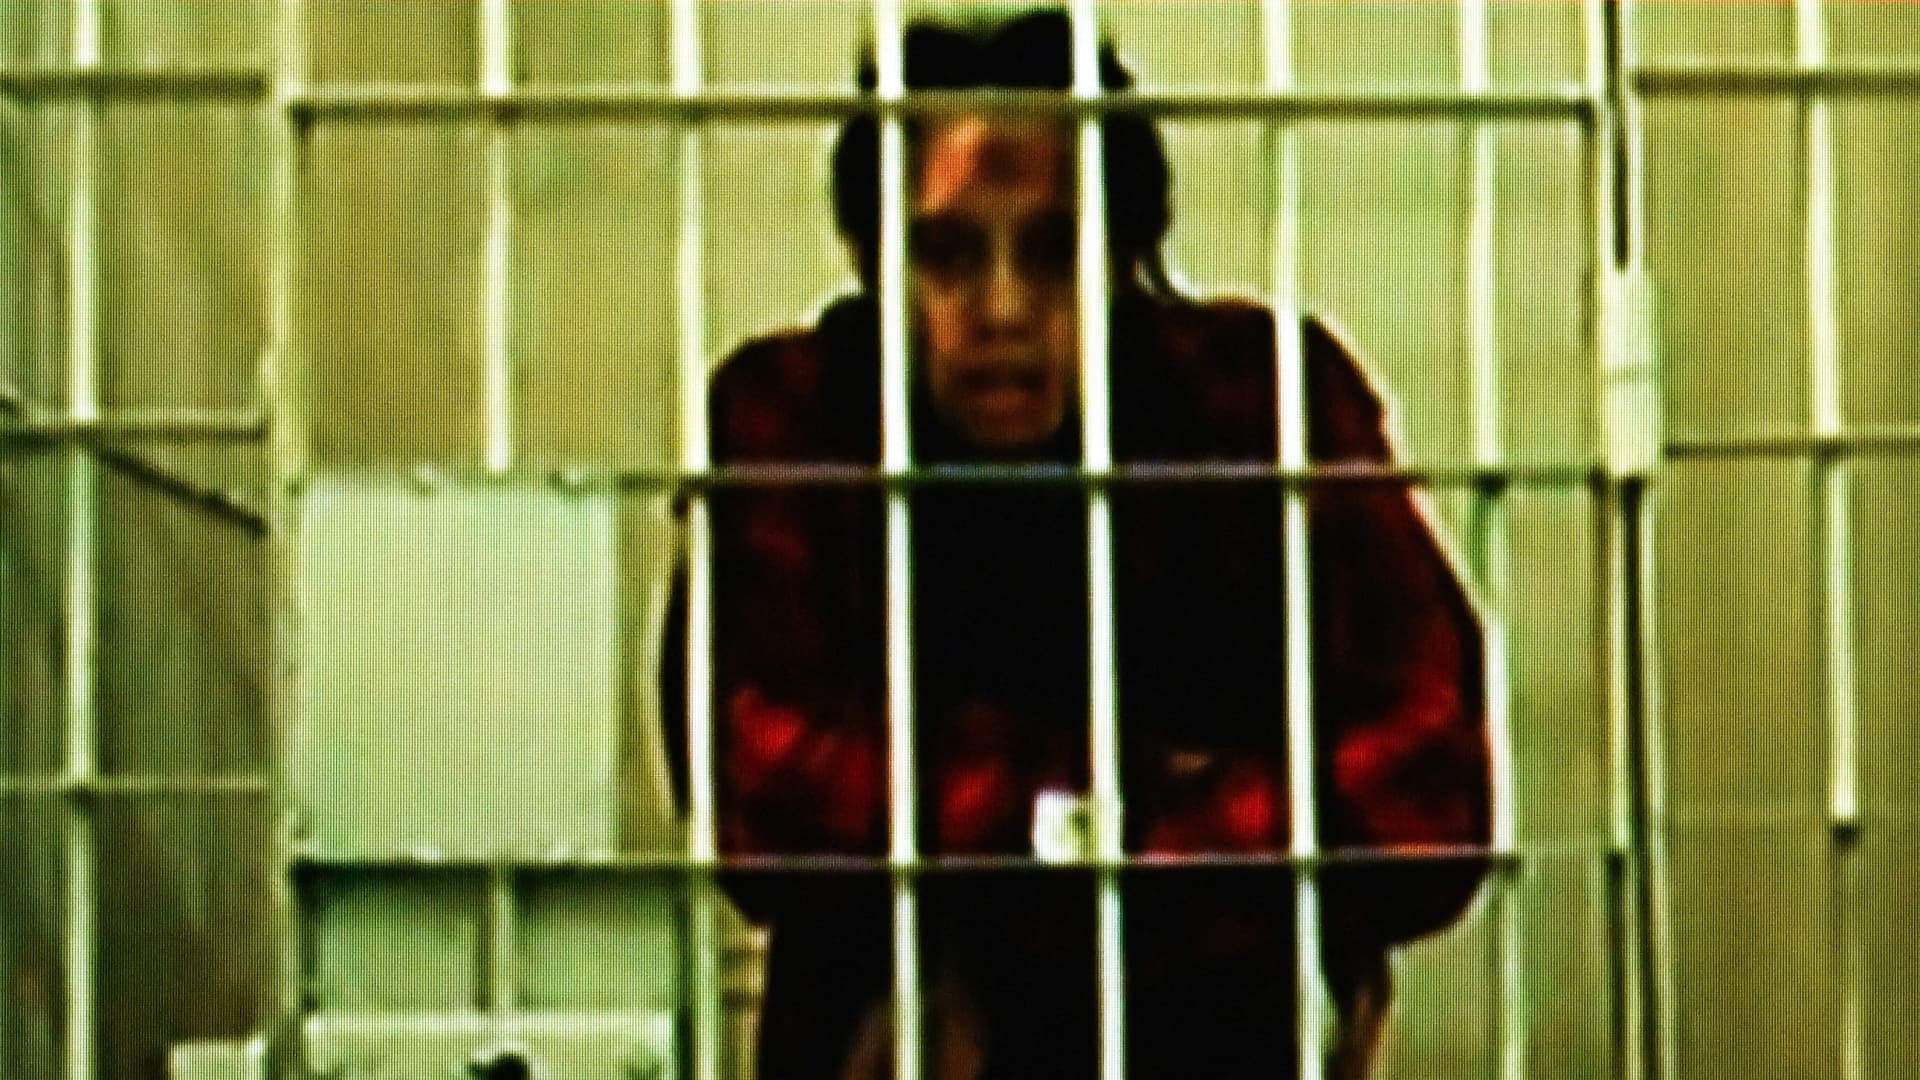 US basketball player Brittney Griner, who was sentenced to nine years in a Russian penal colony in August for drug smuggling, is seen on a screen via a video link from a remand prison before a court hearing to consider an appeal against her sentence, at the Moscow regional court on October 25, 2022.